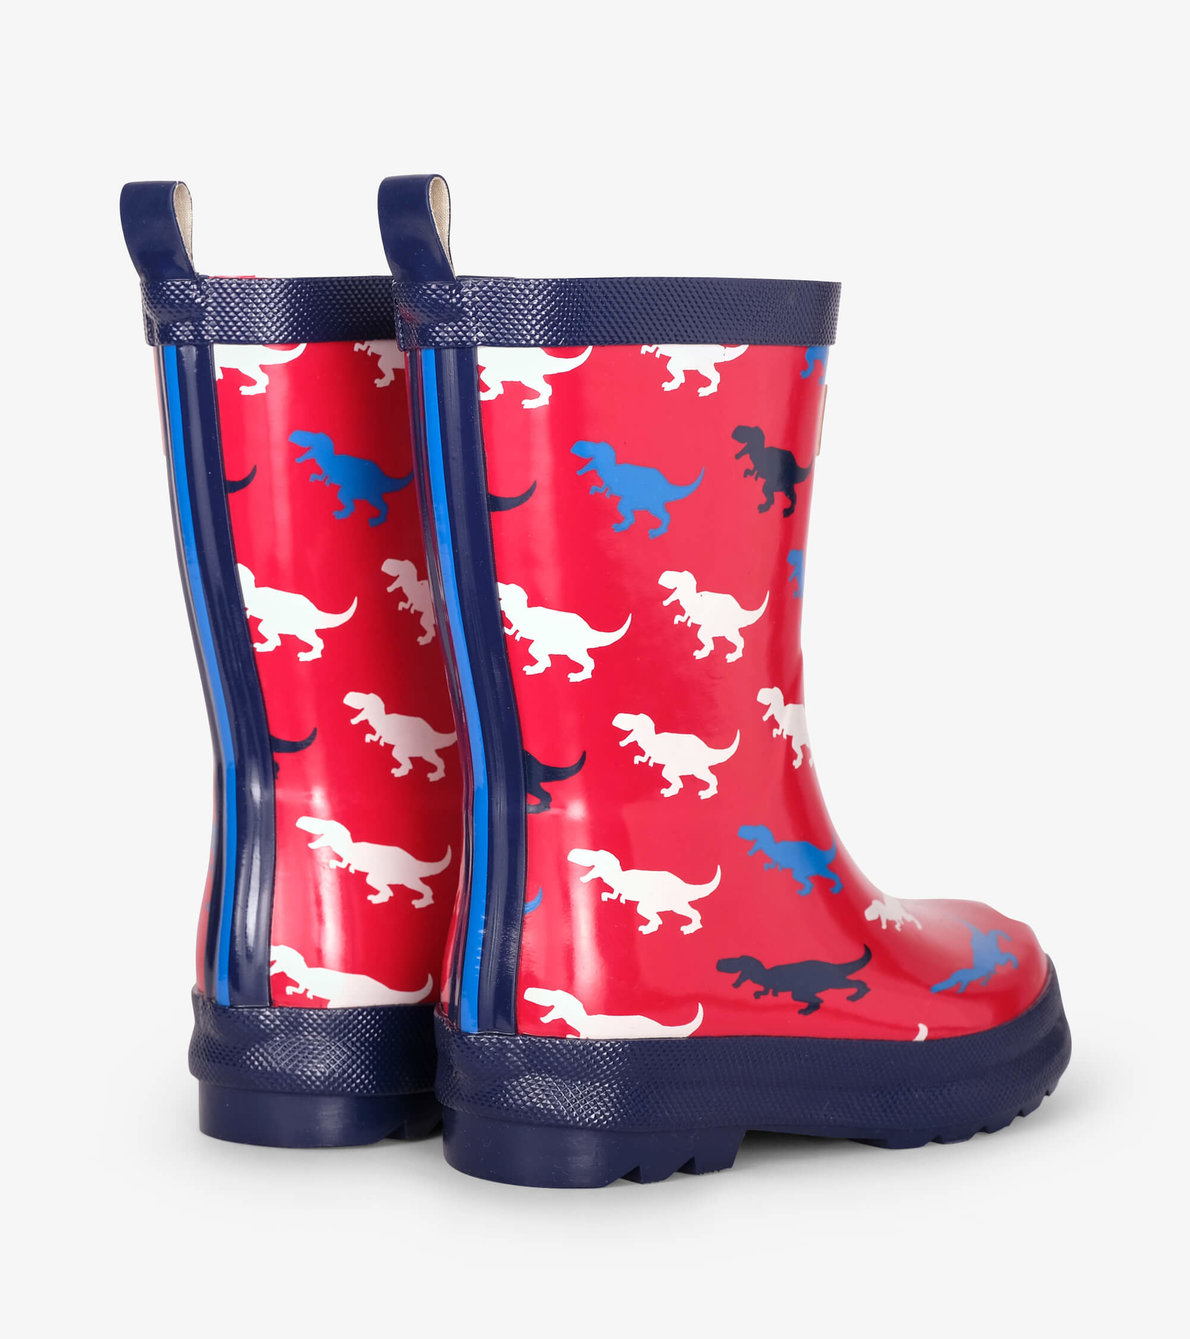 View larger image of T-Rex Silhouettes Shiny Rain Boots